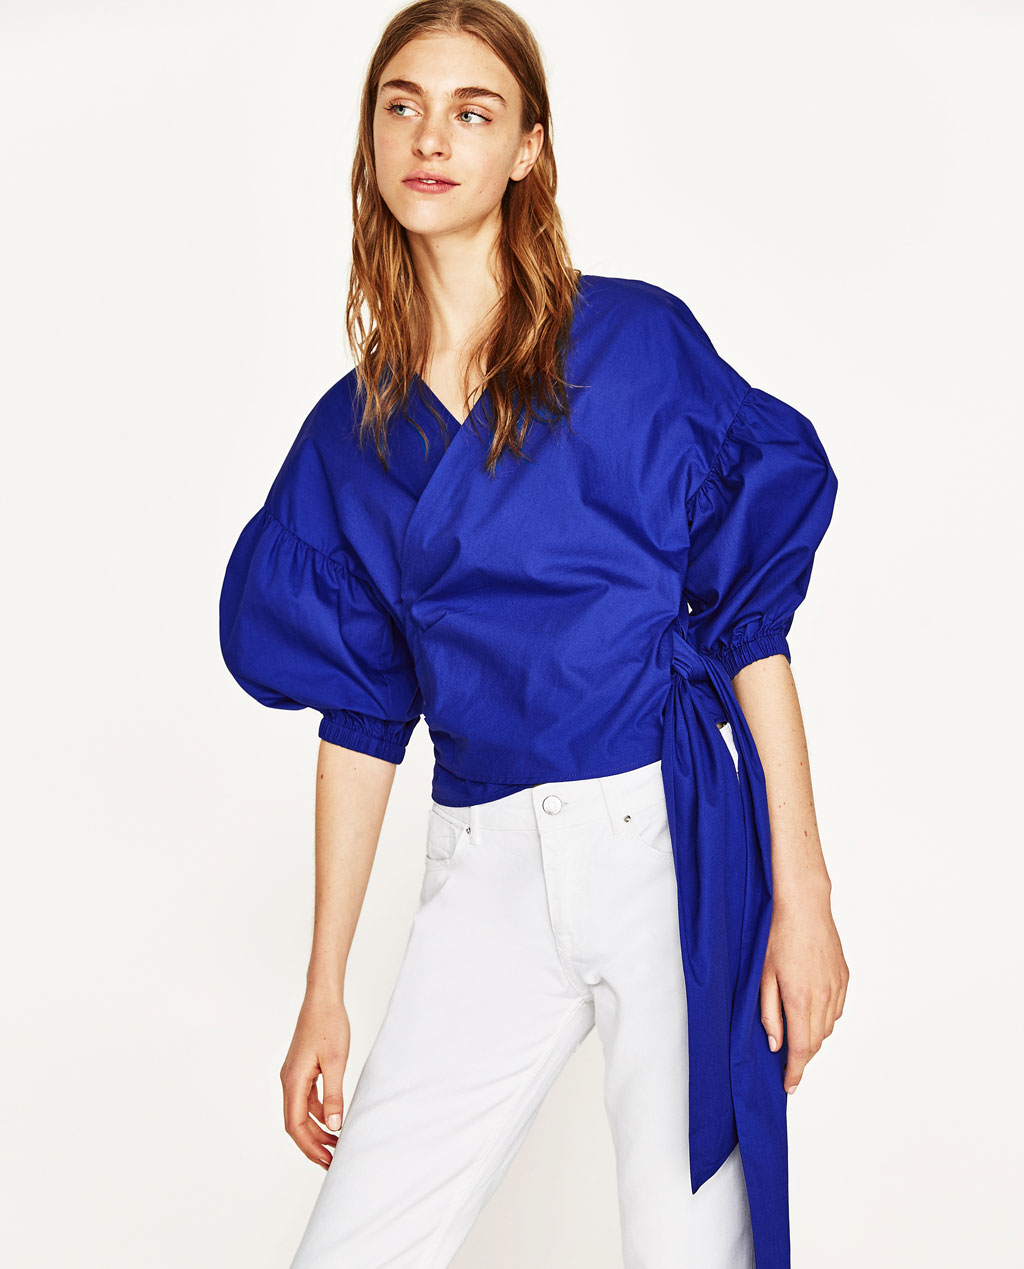 My 6 Most Wanted- Statement Sleeve Tops from Zara - My Bitchy Resting Face